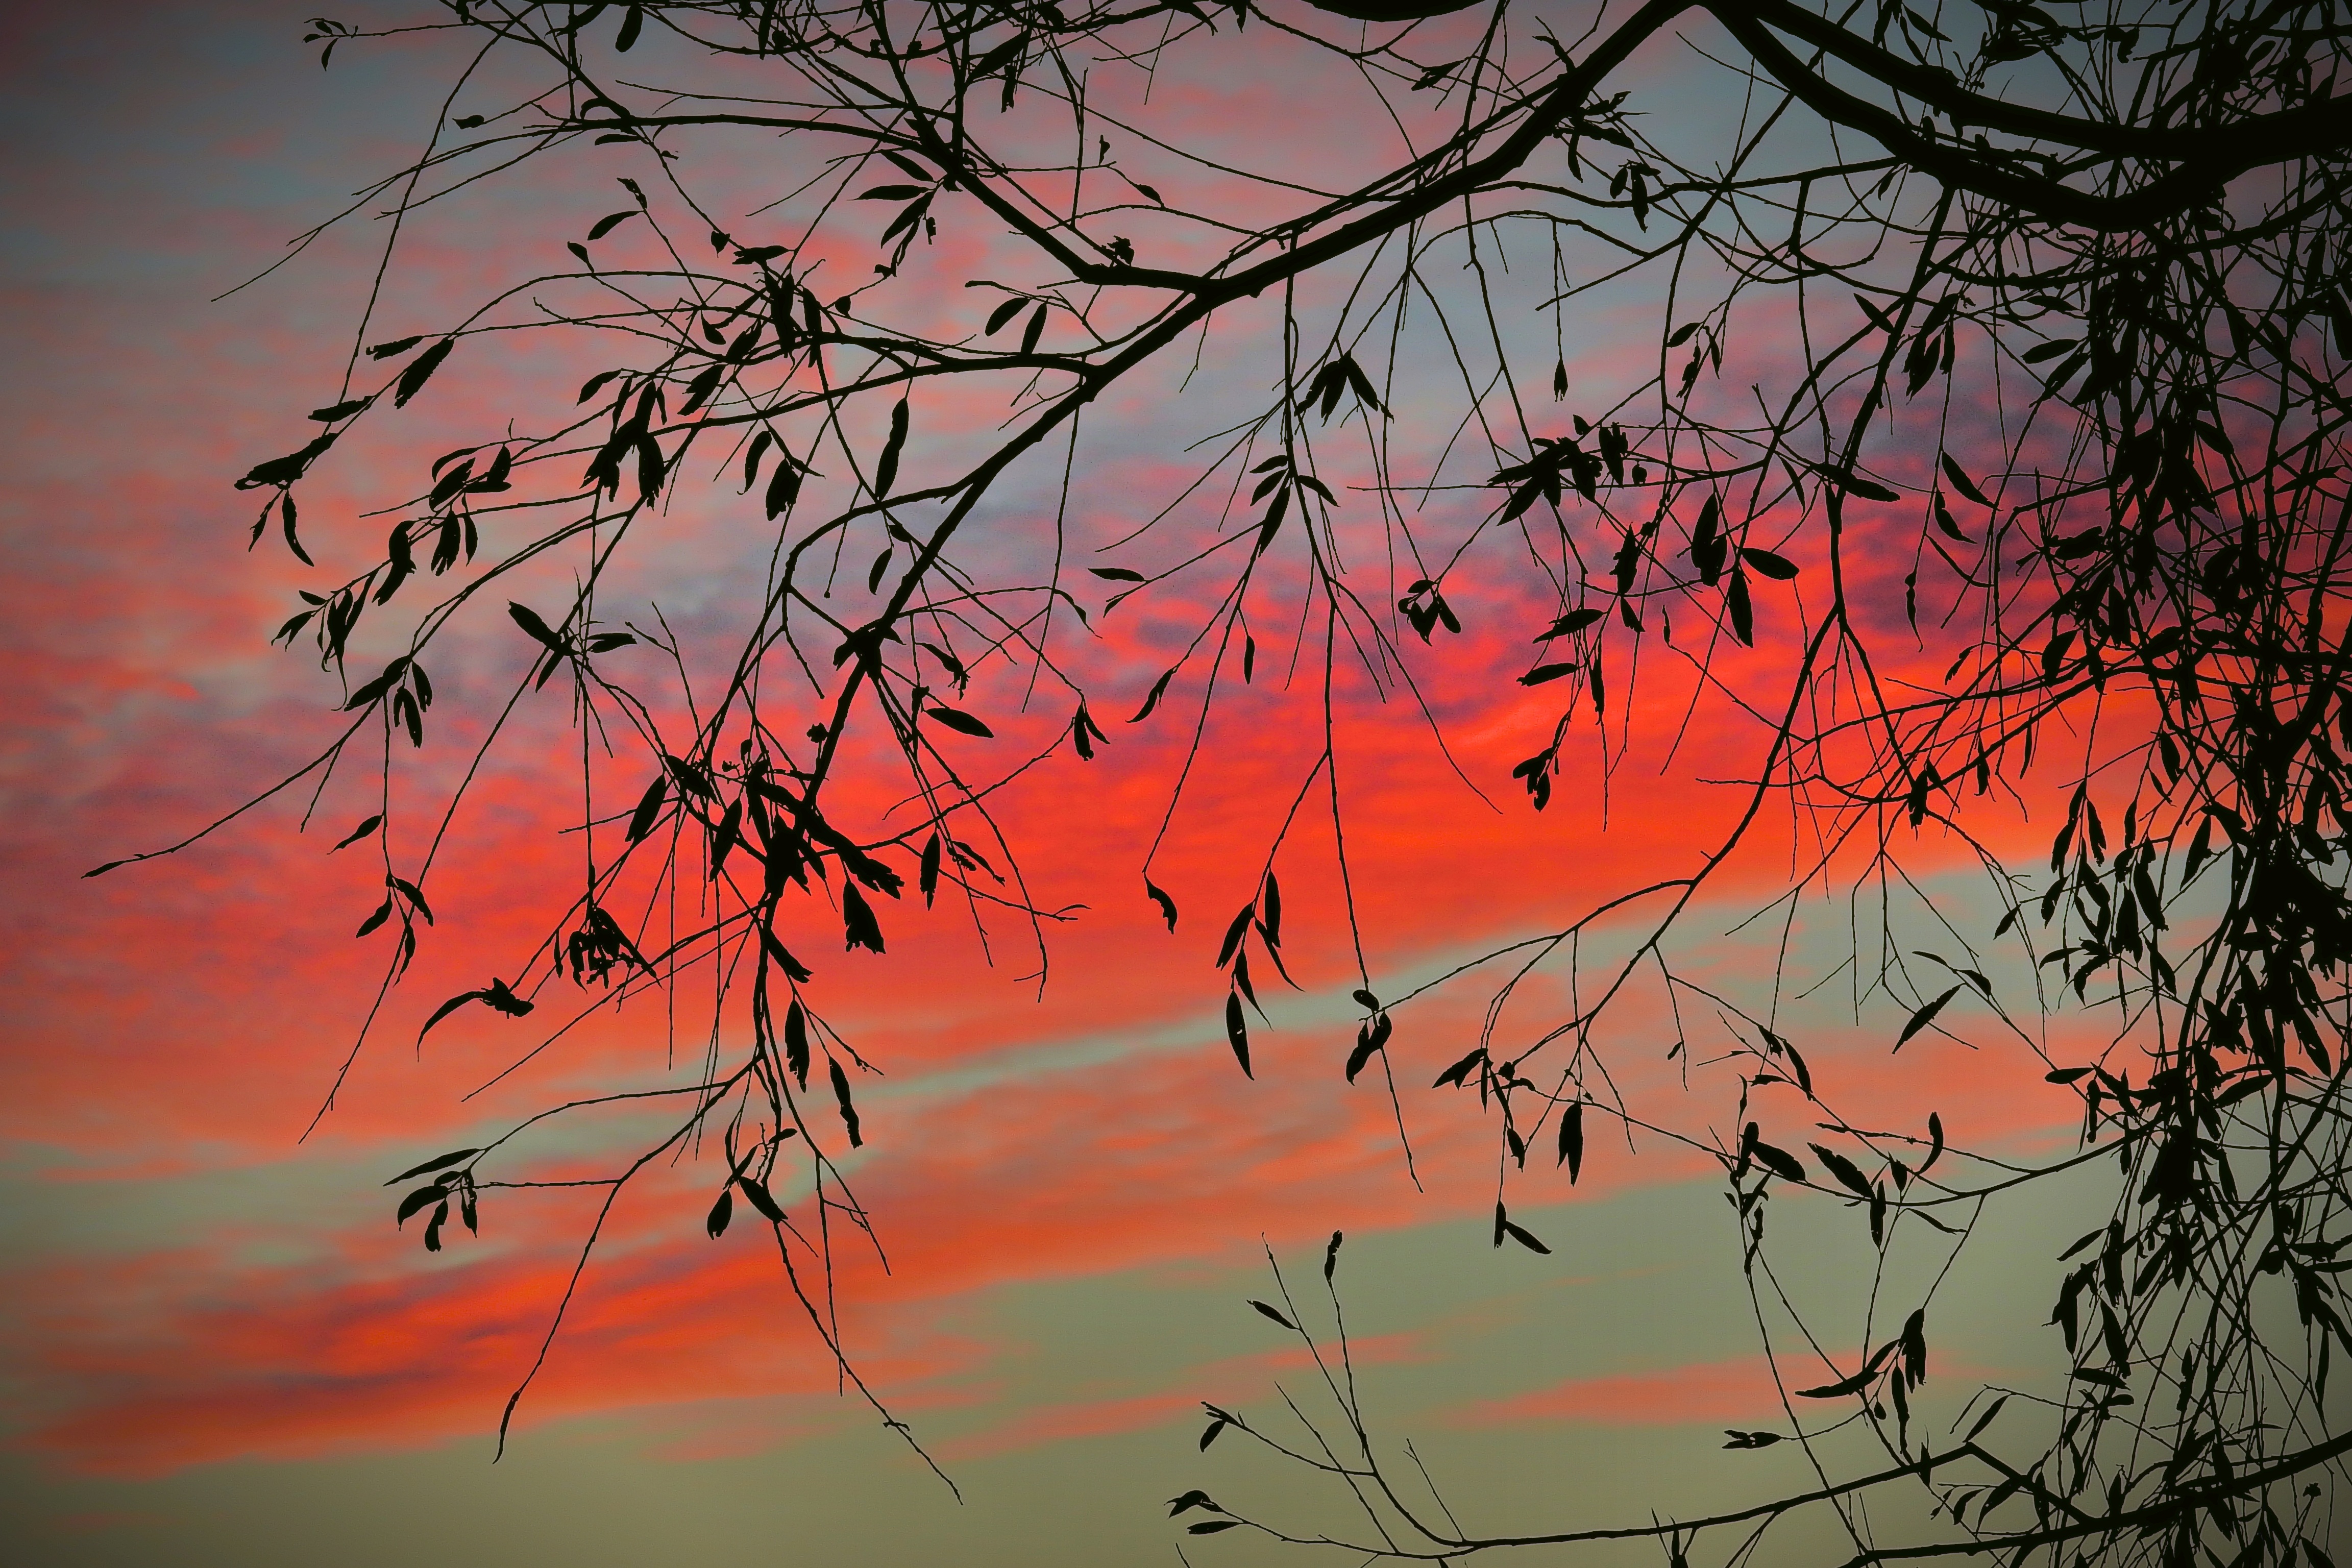 leaves, tree, twilight, nature, sunset, sky, clouds, wood, branch, dusk 1080p